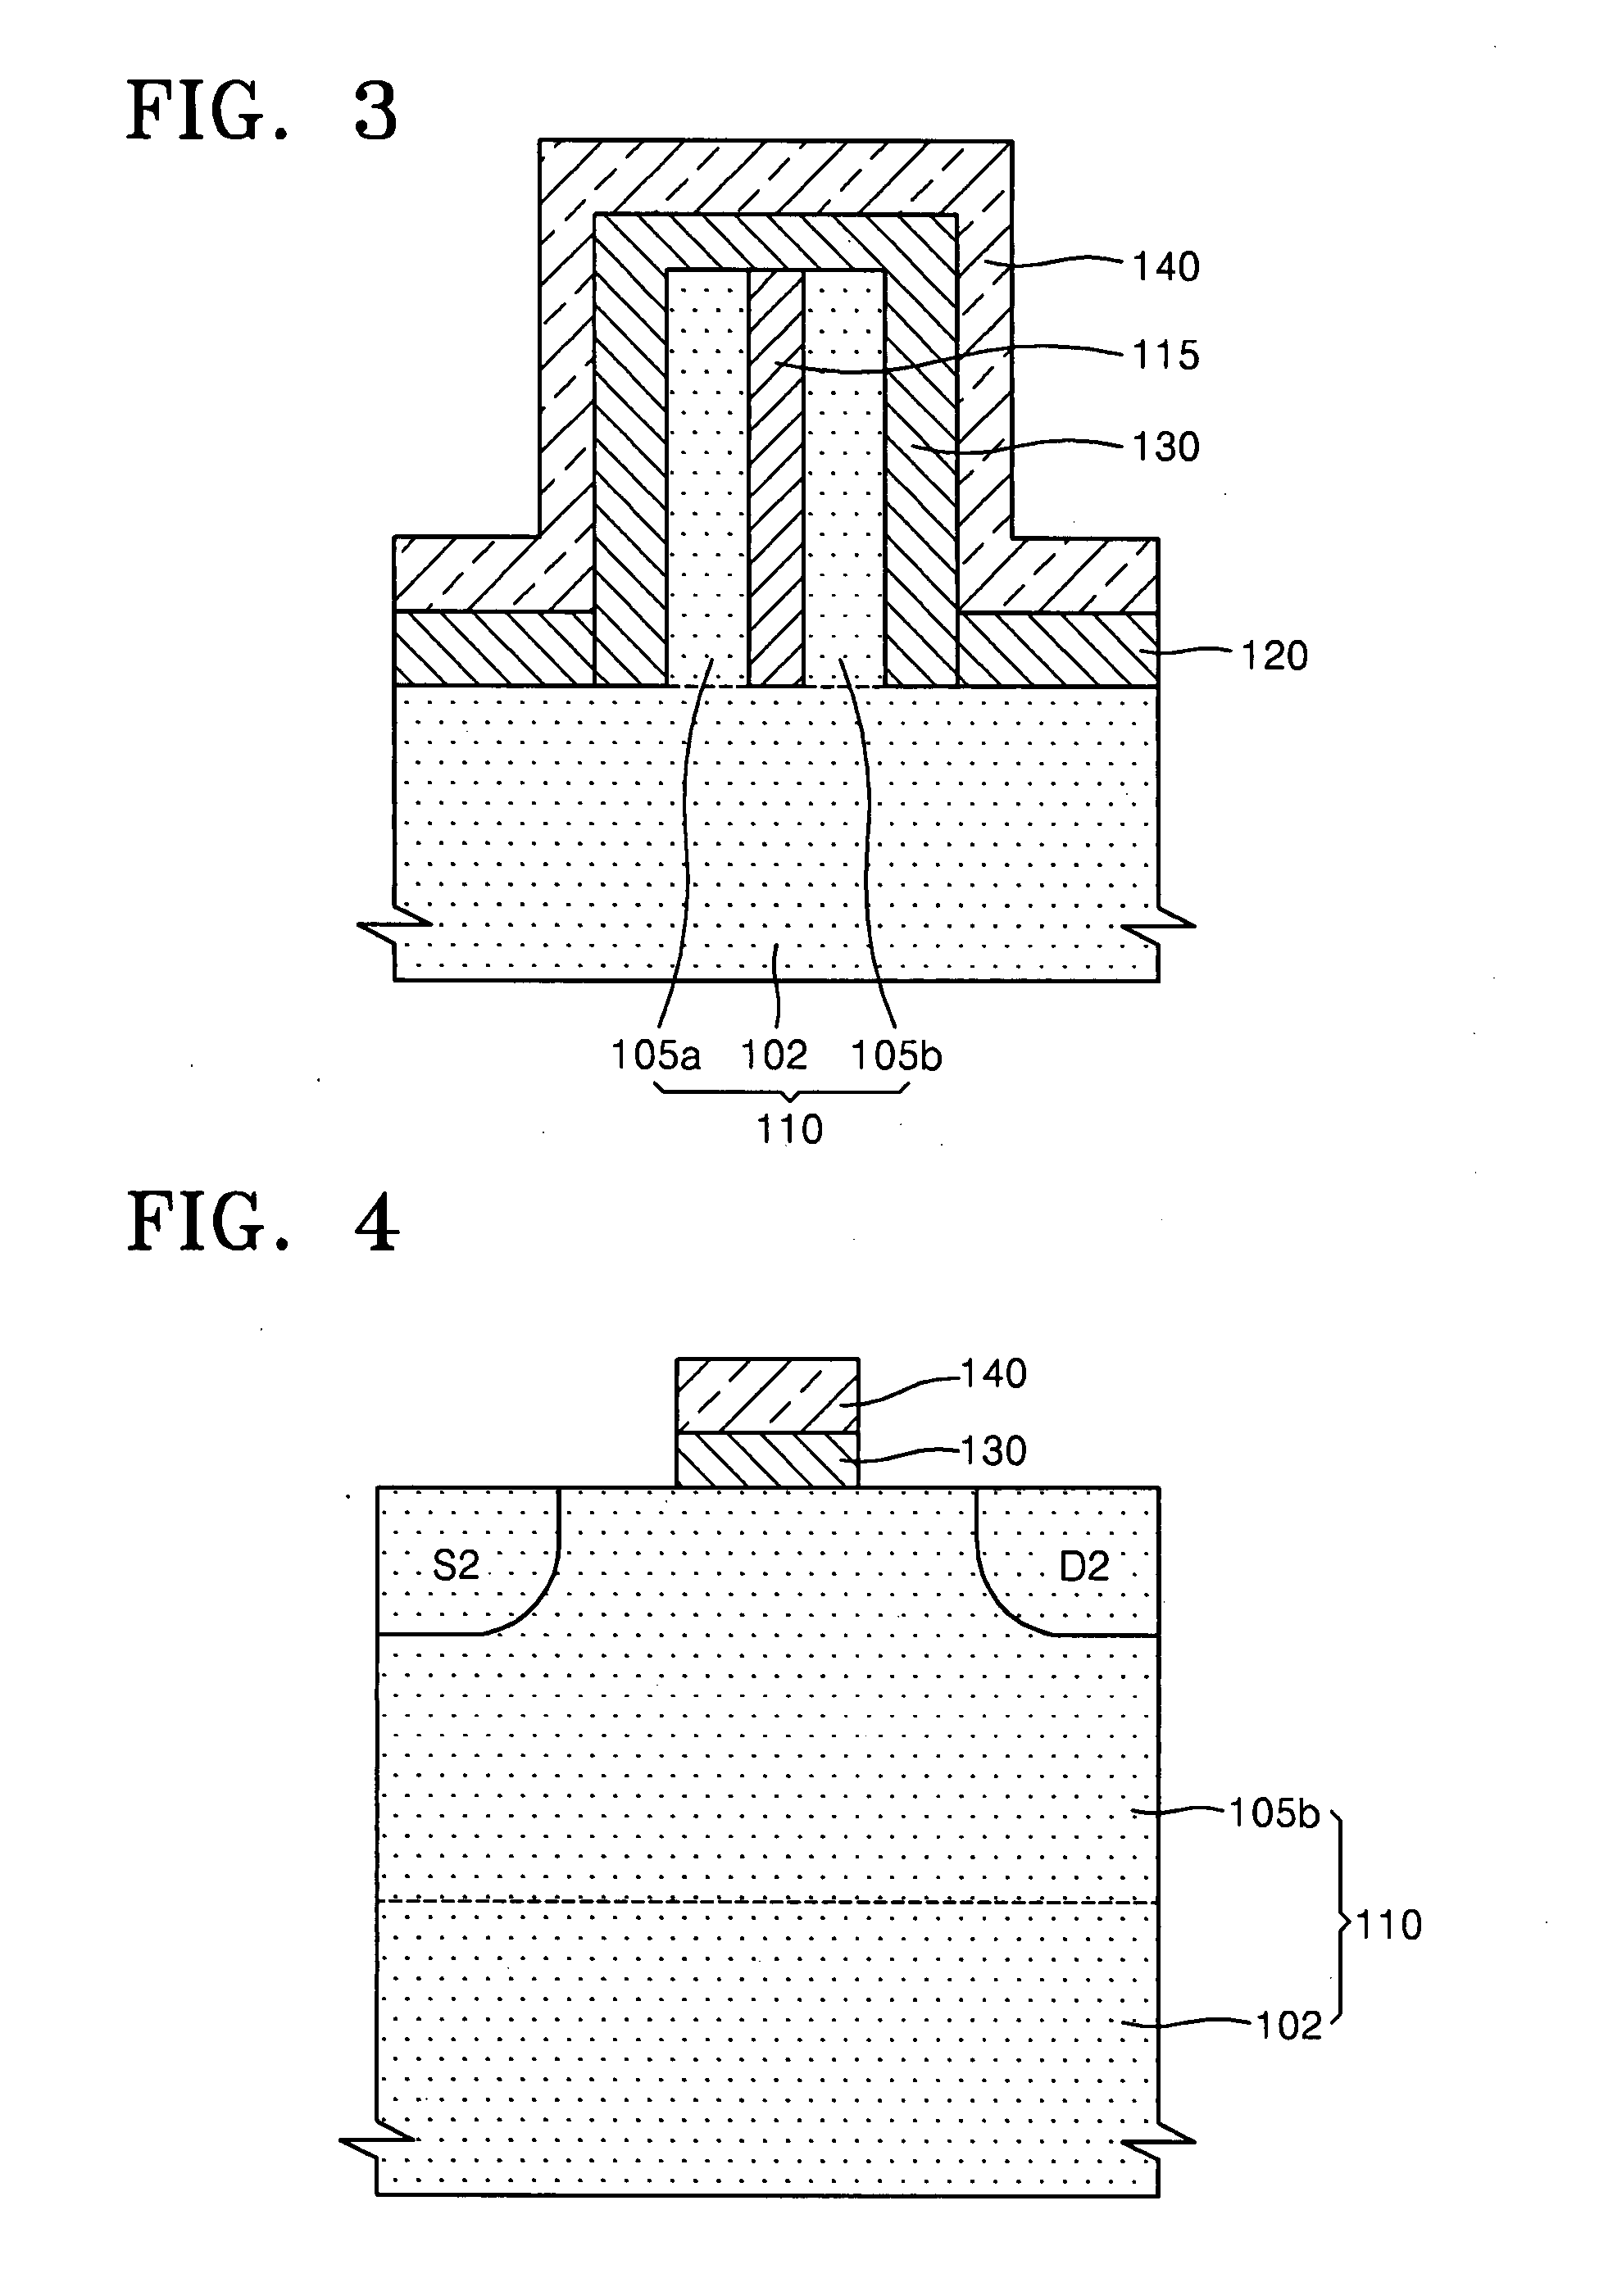 Non-volatile memory device having four storage node films and methods of operating and manufacturing the same